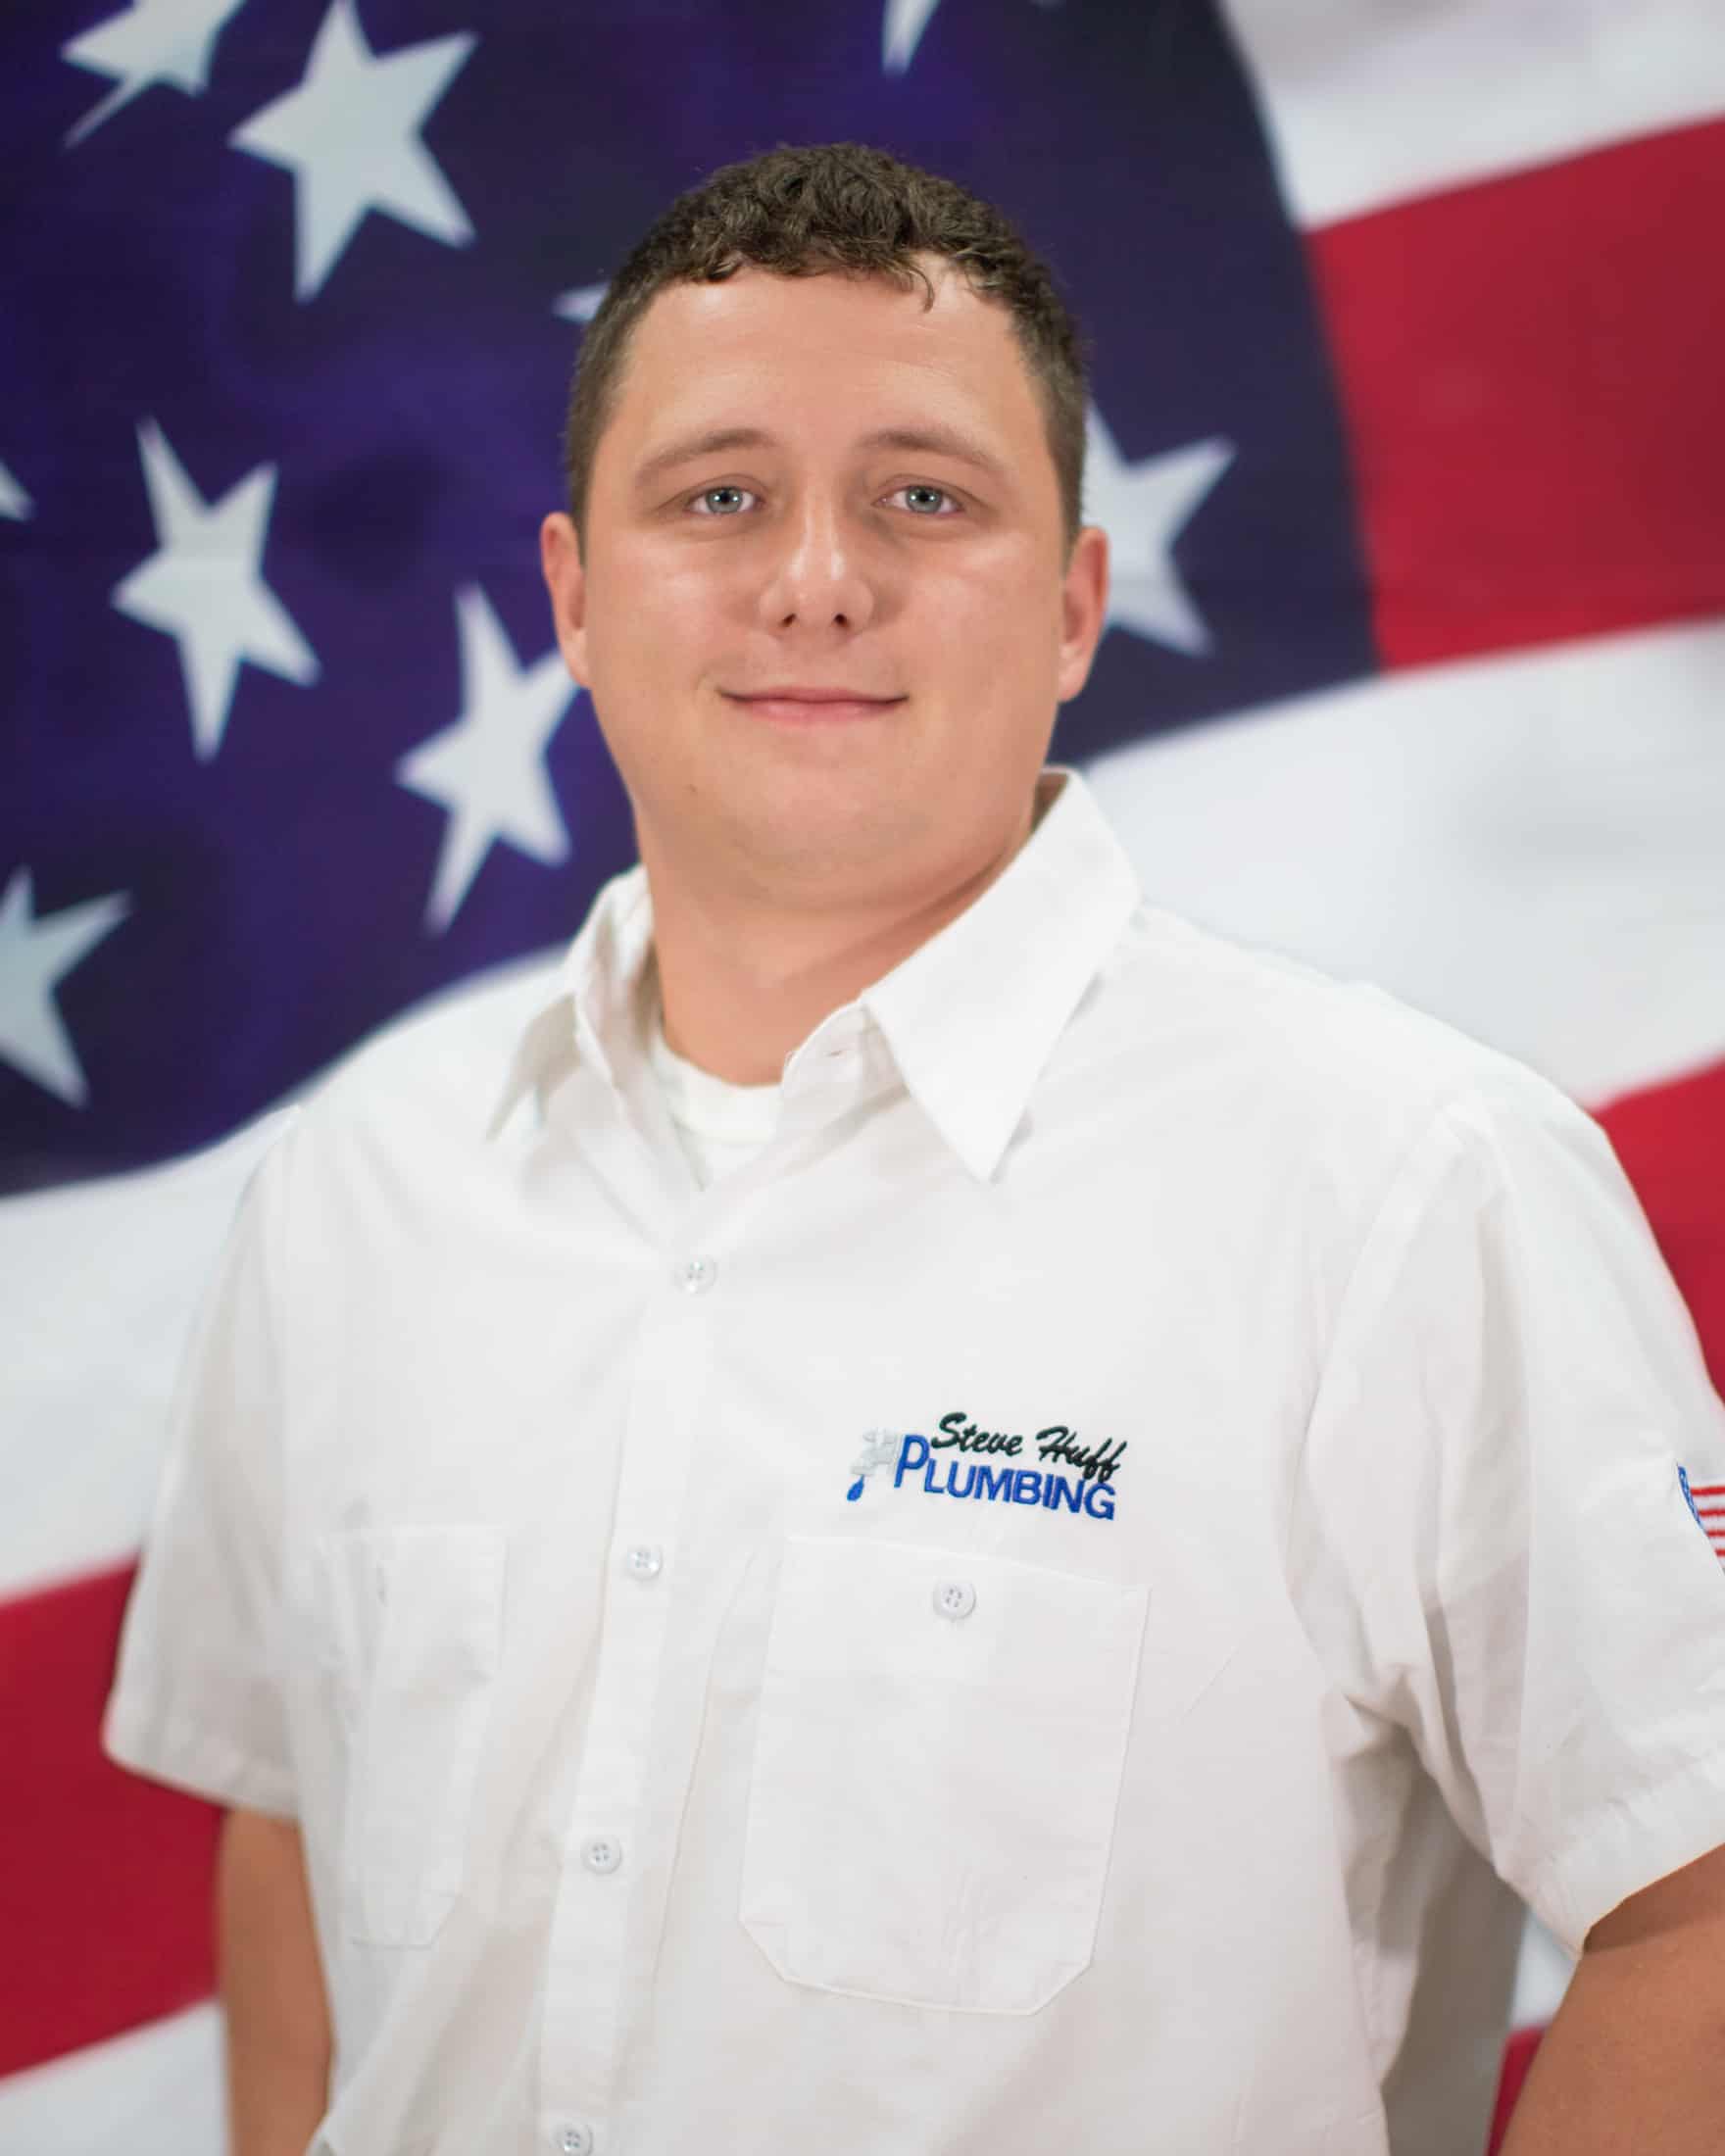 plumber in white shirt sitting in front of American flag